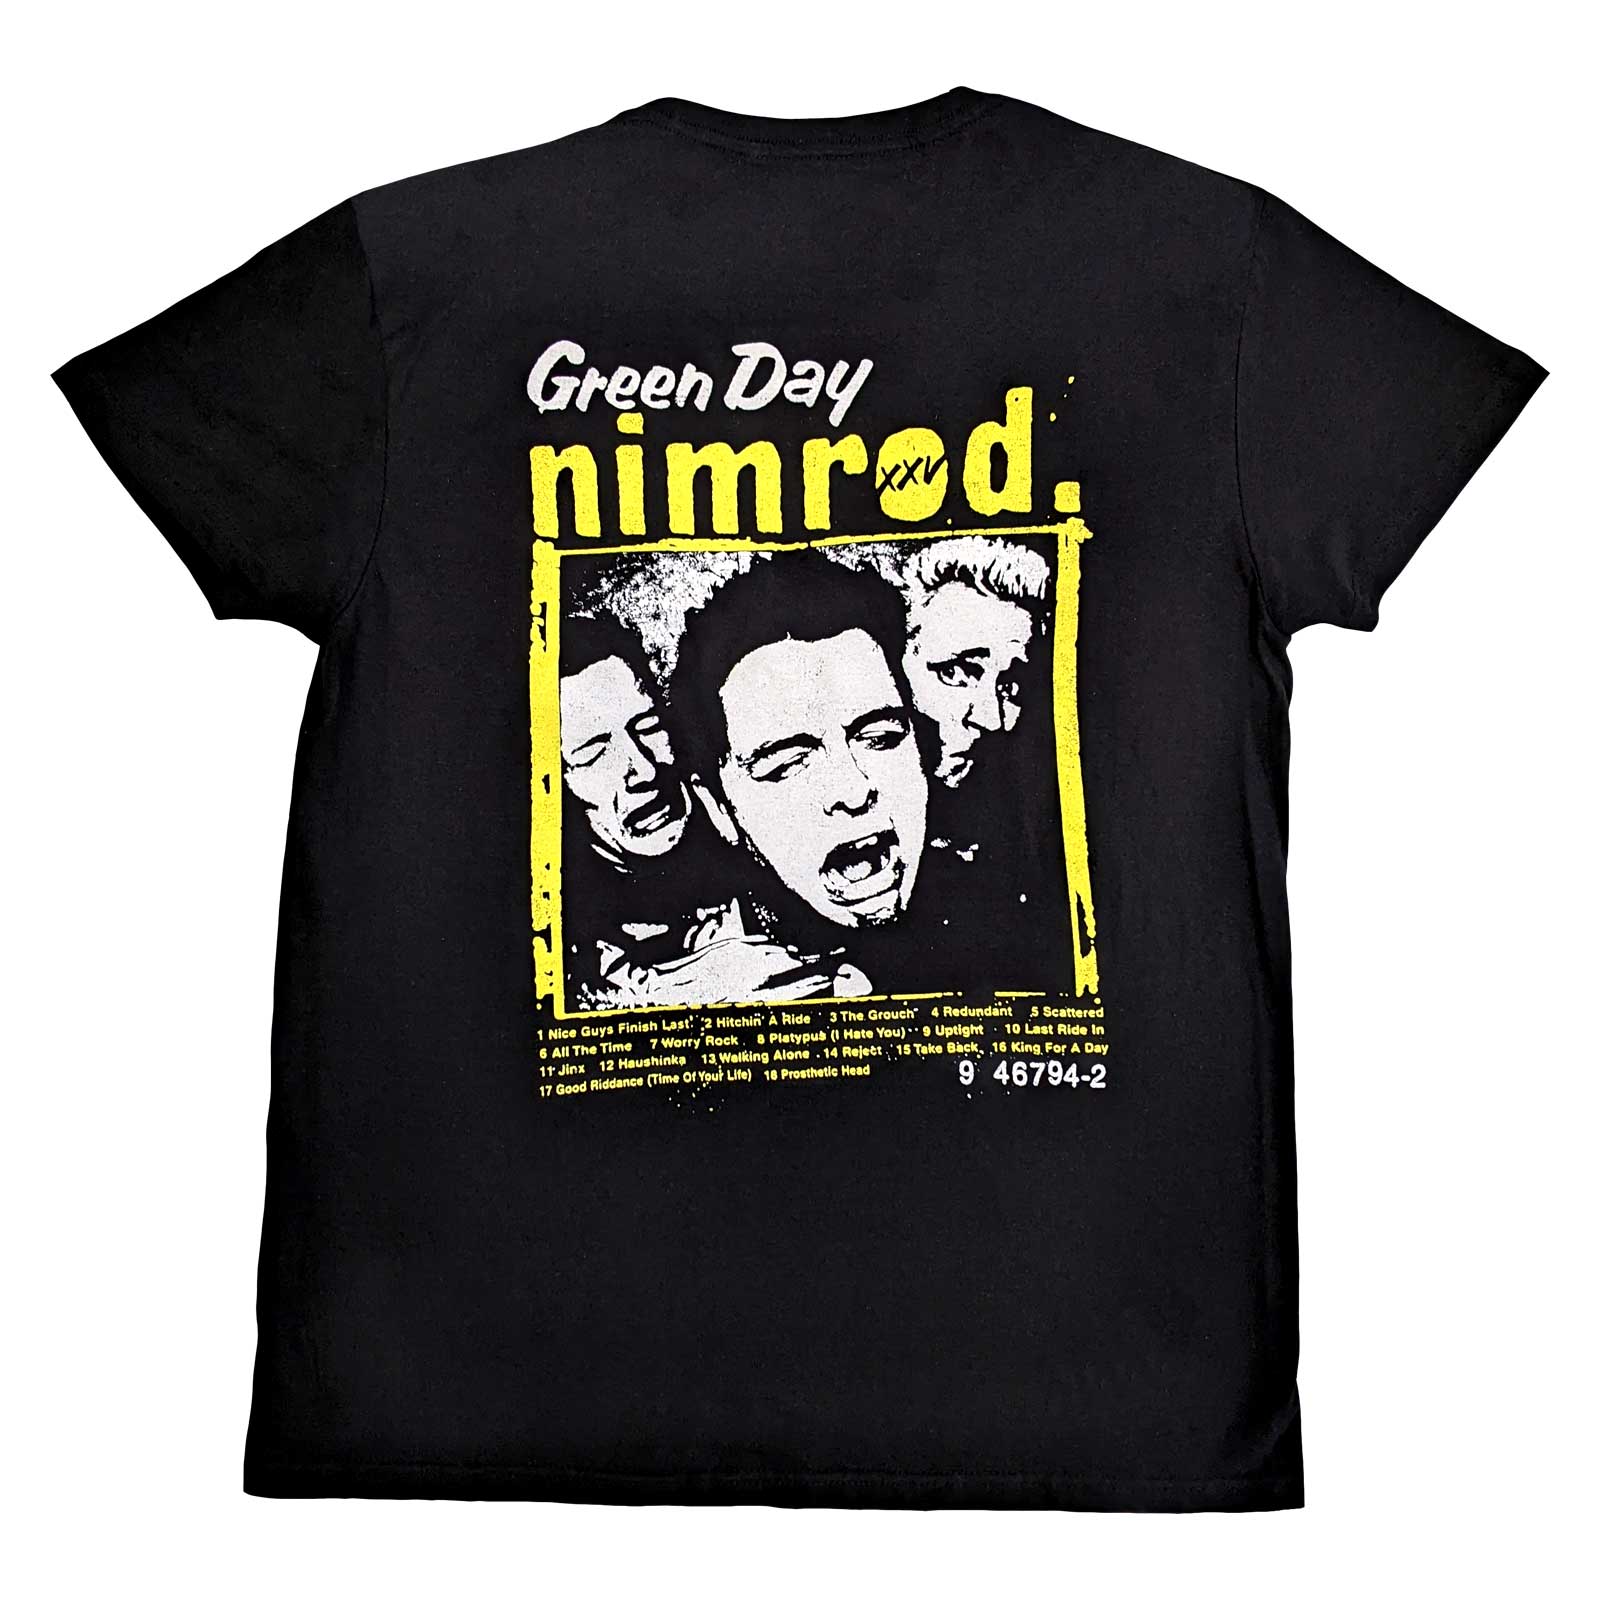 Green Day Adult T-Shirt - Nimrod Breast Print - Official Licensed Design